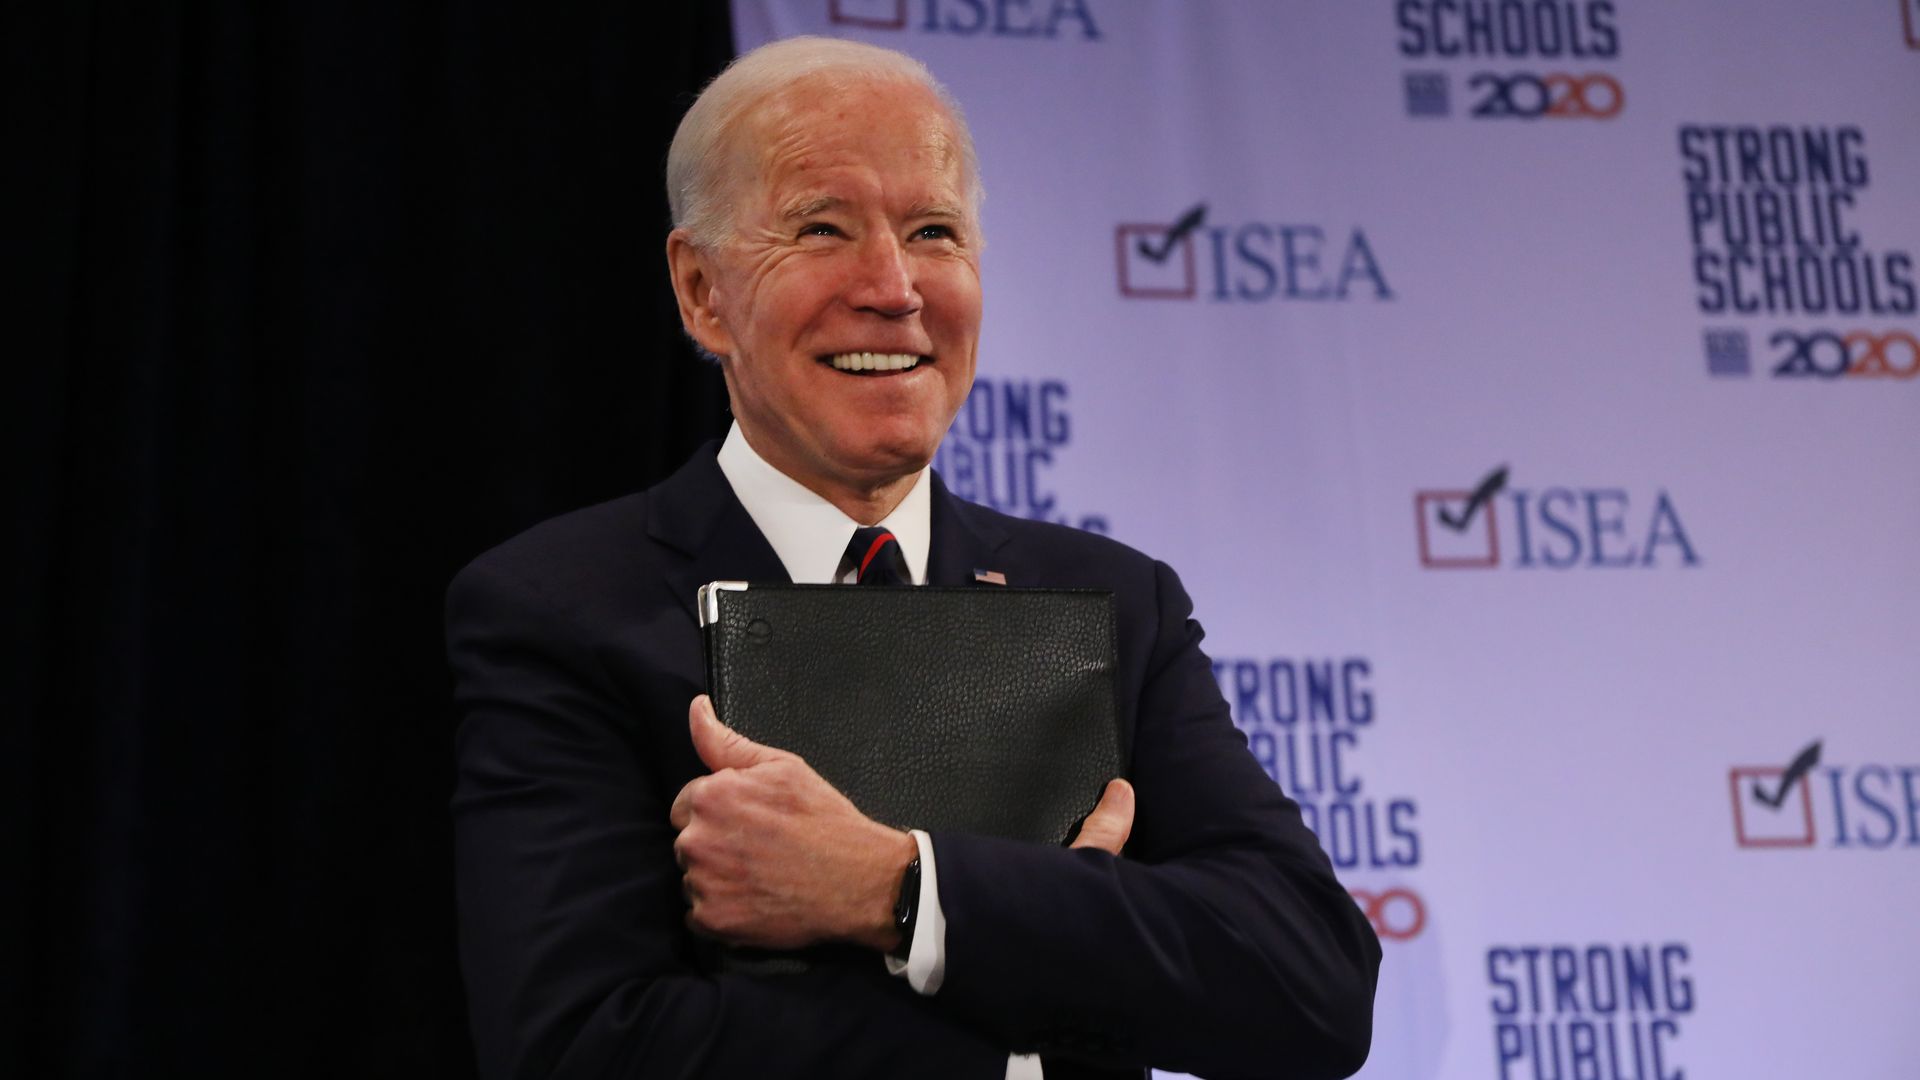 Joe Biden is seen while appearing at an Iowa teachers event in January 2020.